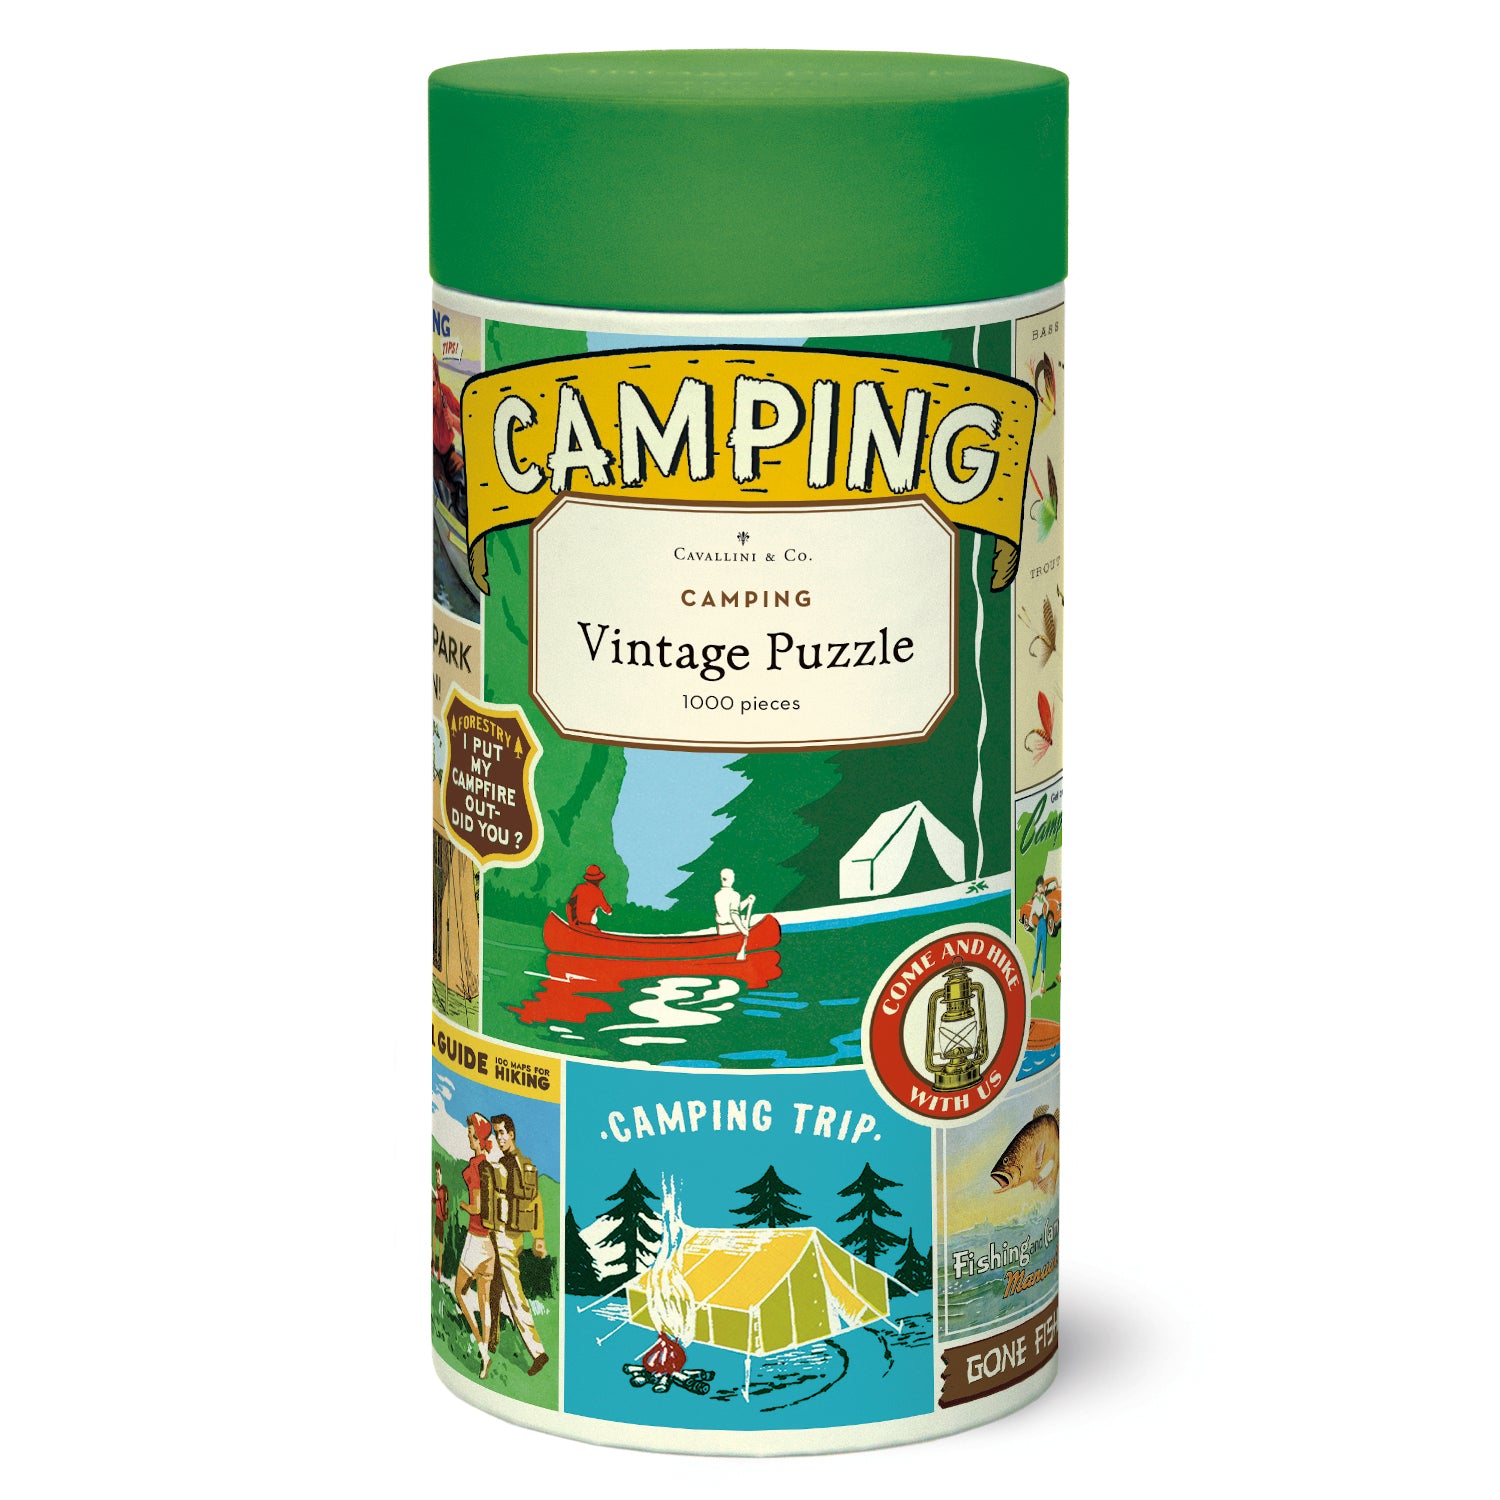 A 1000-piece Camping Puzzle featuring vintage illustrations of a camping theme, packed in a cylindrical container by Cavallini Papers &amp; Co.